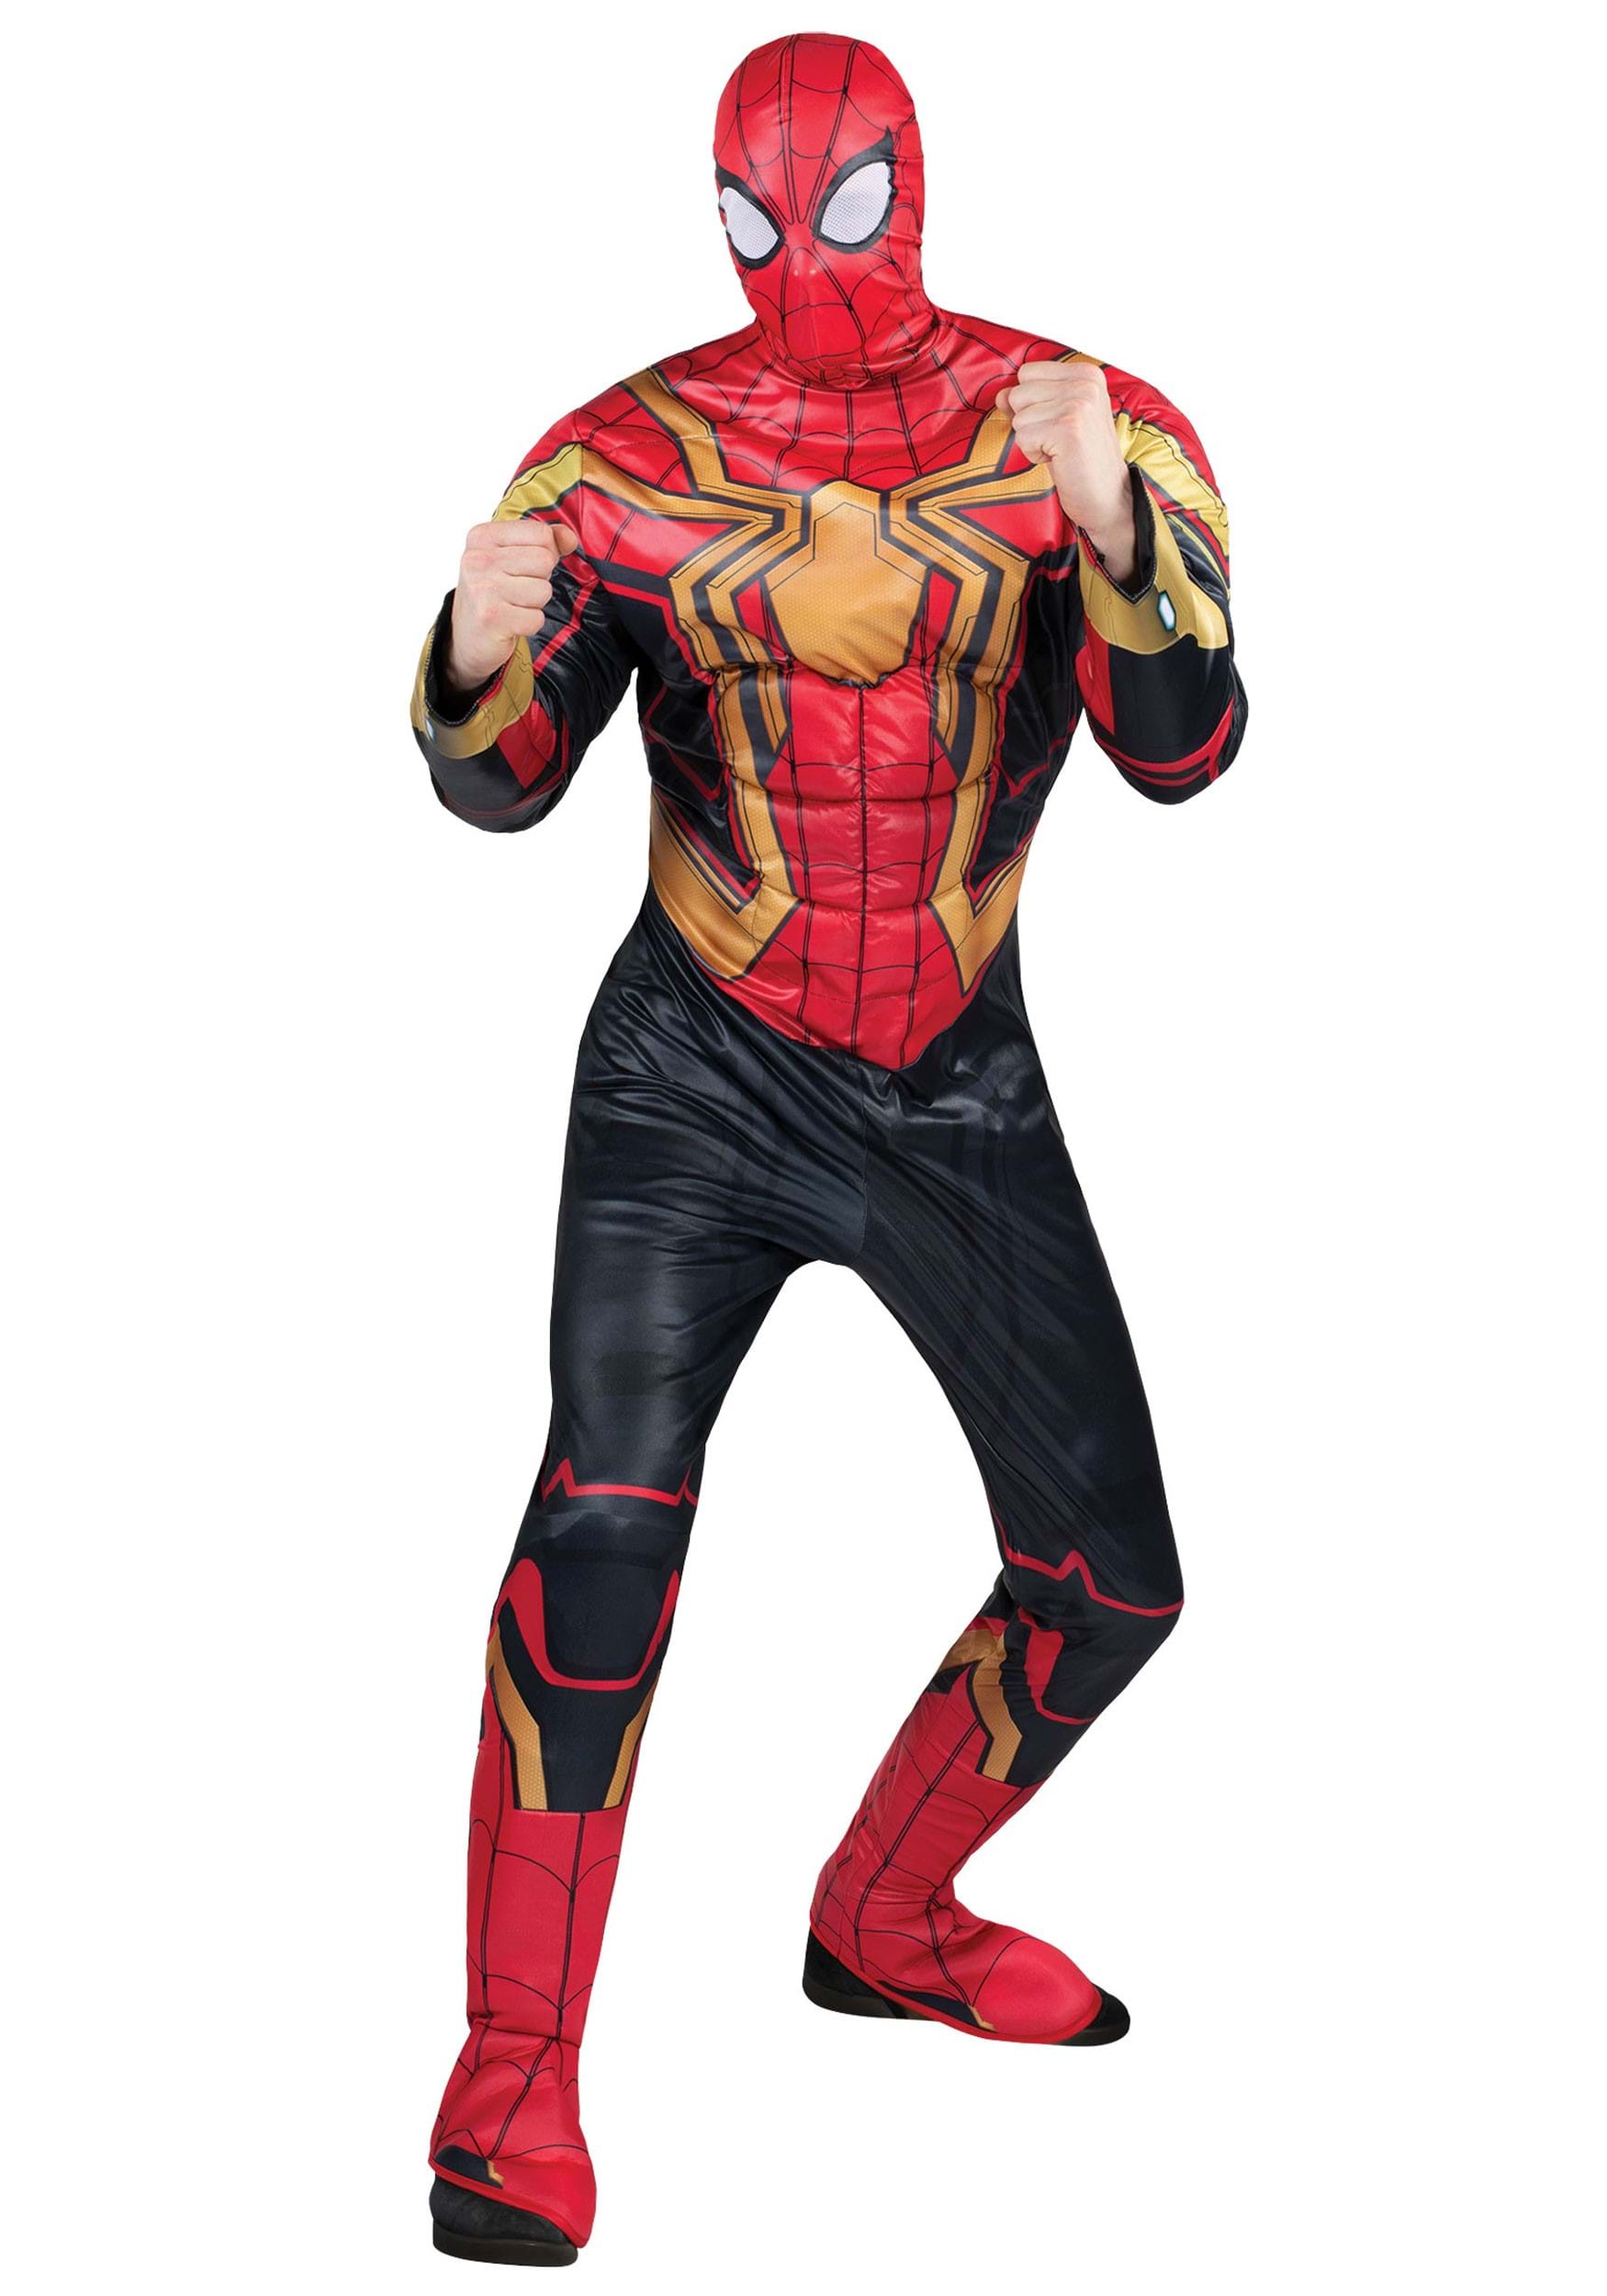 Image of Jazwares Integrated Suit Spider-Man Costume for Adults | Marvel Costumes